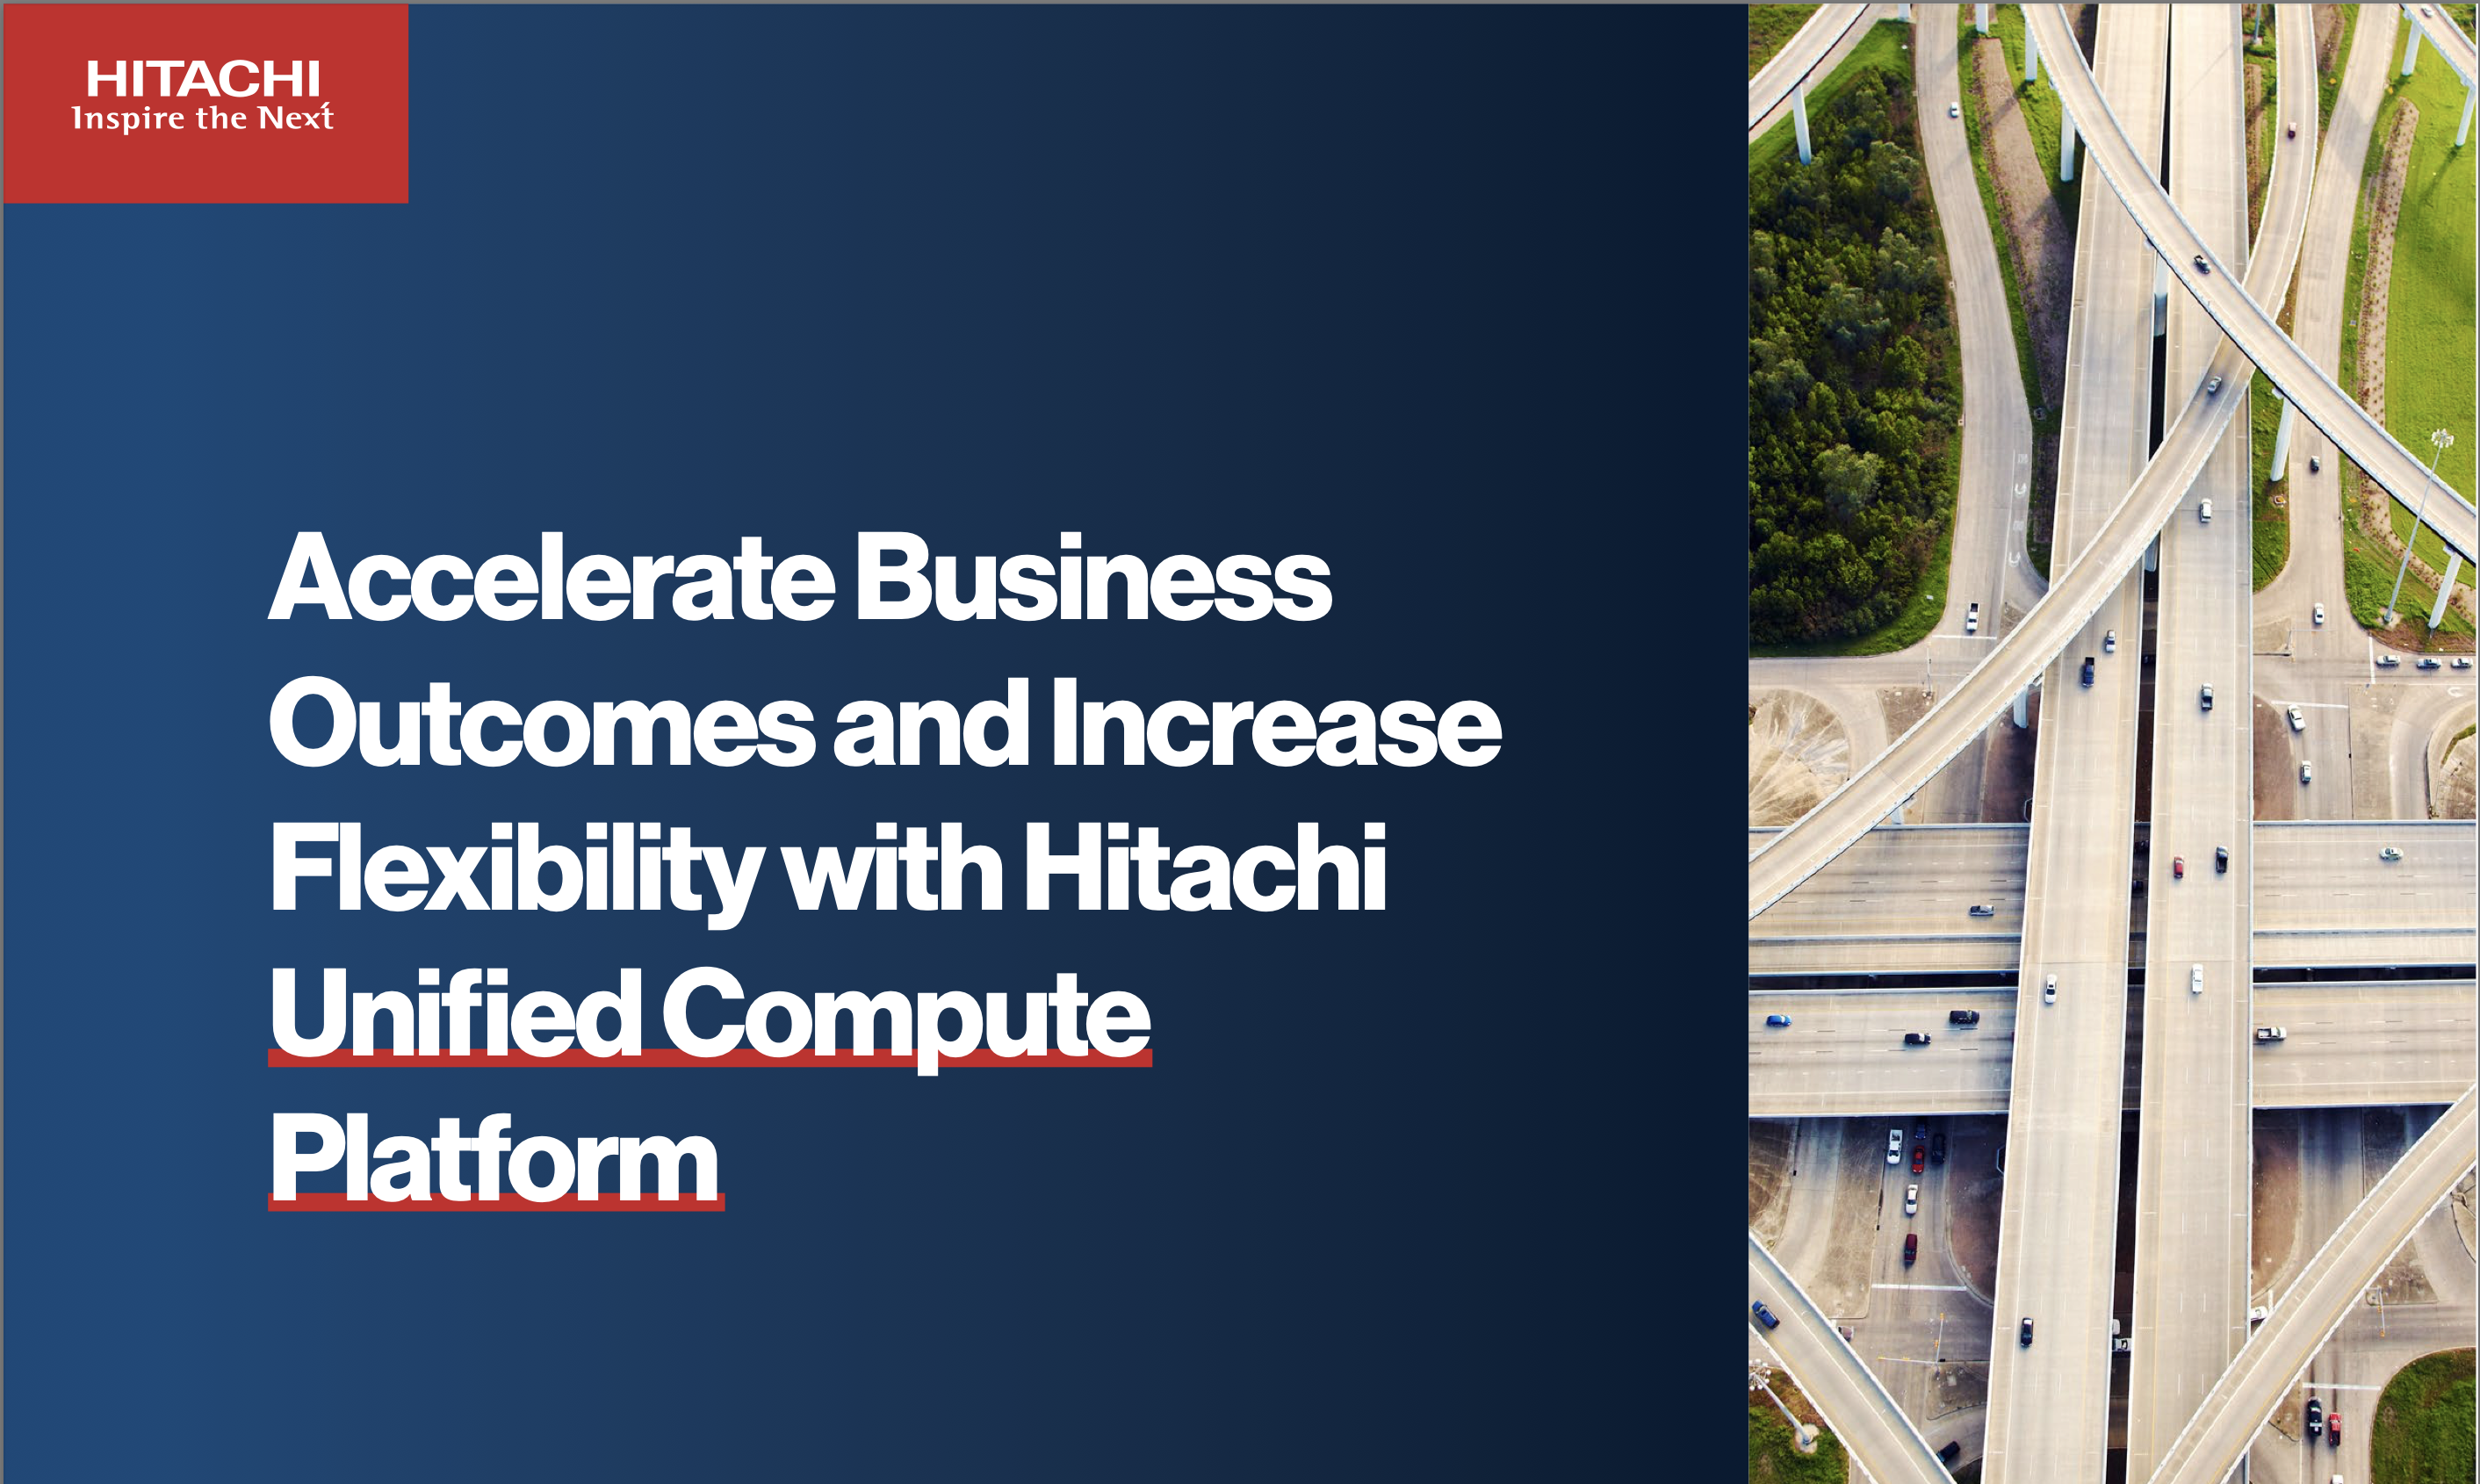 Accelerate Business Outcomes with Hitachi Unified Compute